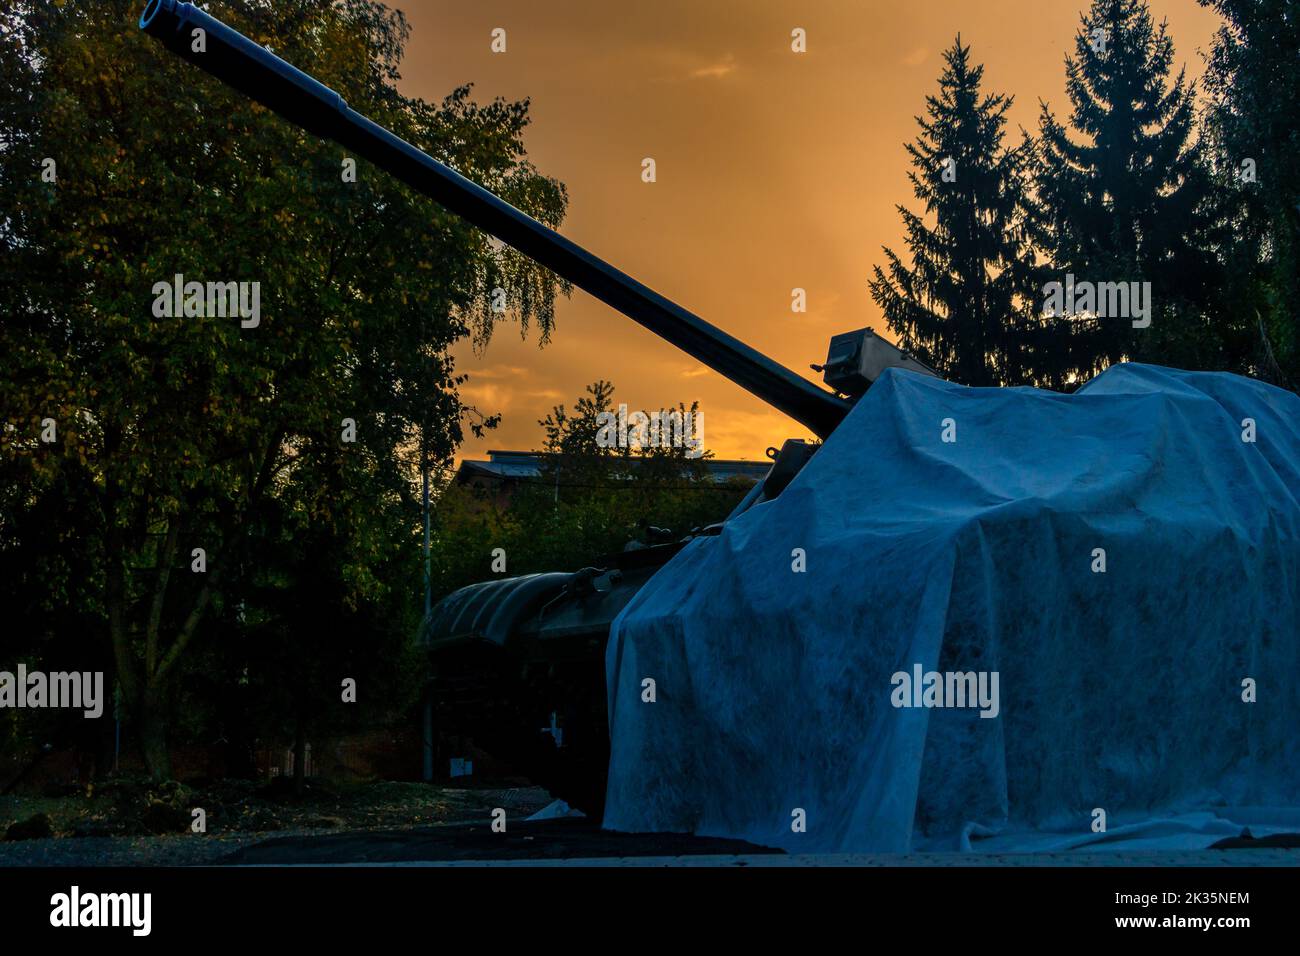 a tank covered with material stands in a city park against the background of an evening orange sky, selective focus Stock Photo